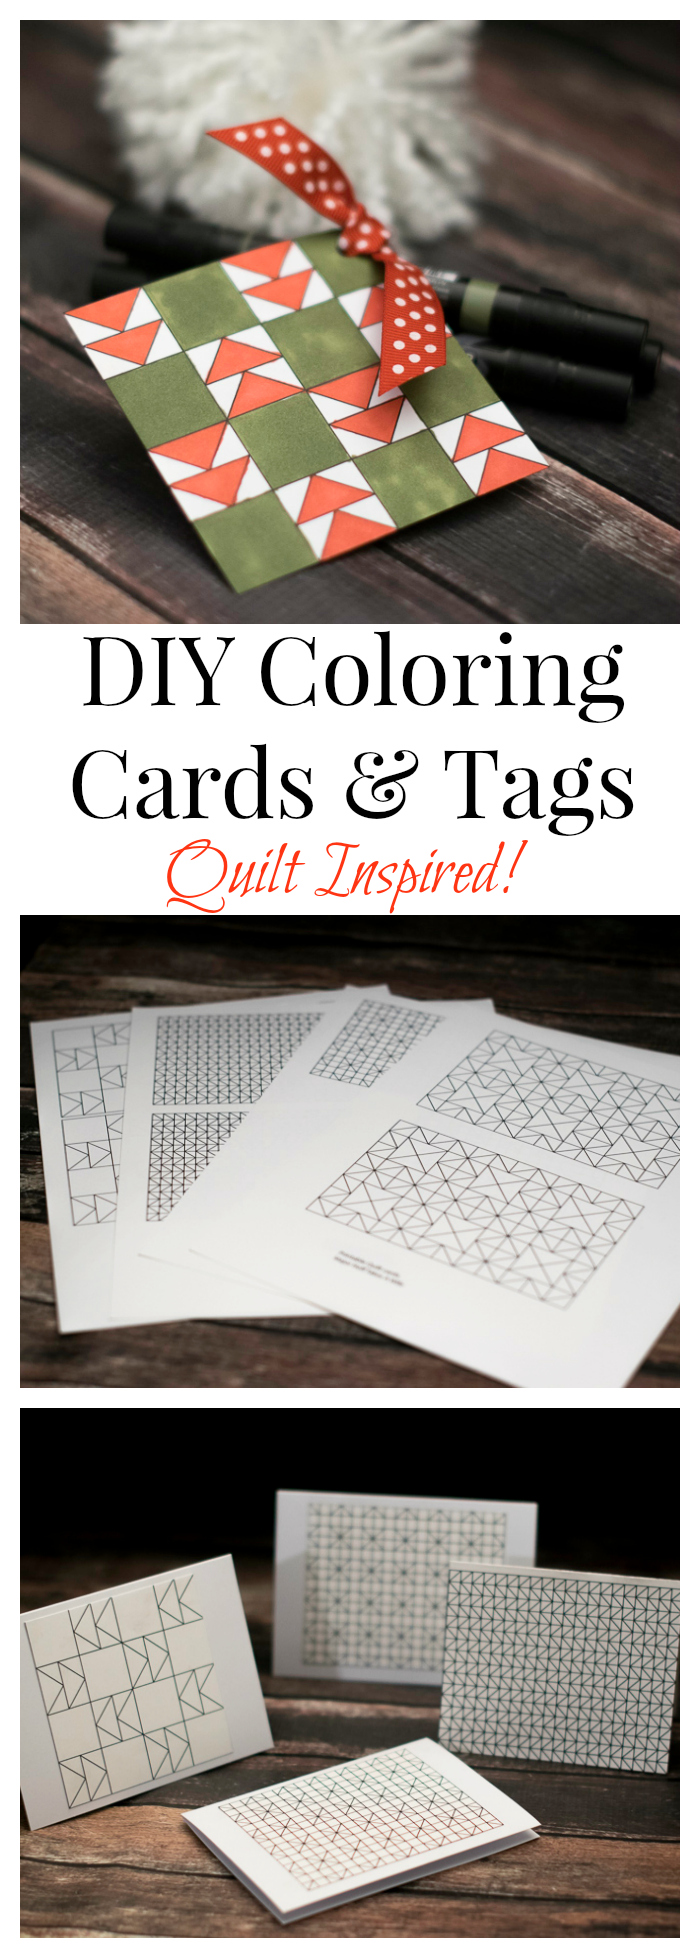 DIY Coloring Cards  Tags